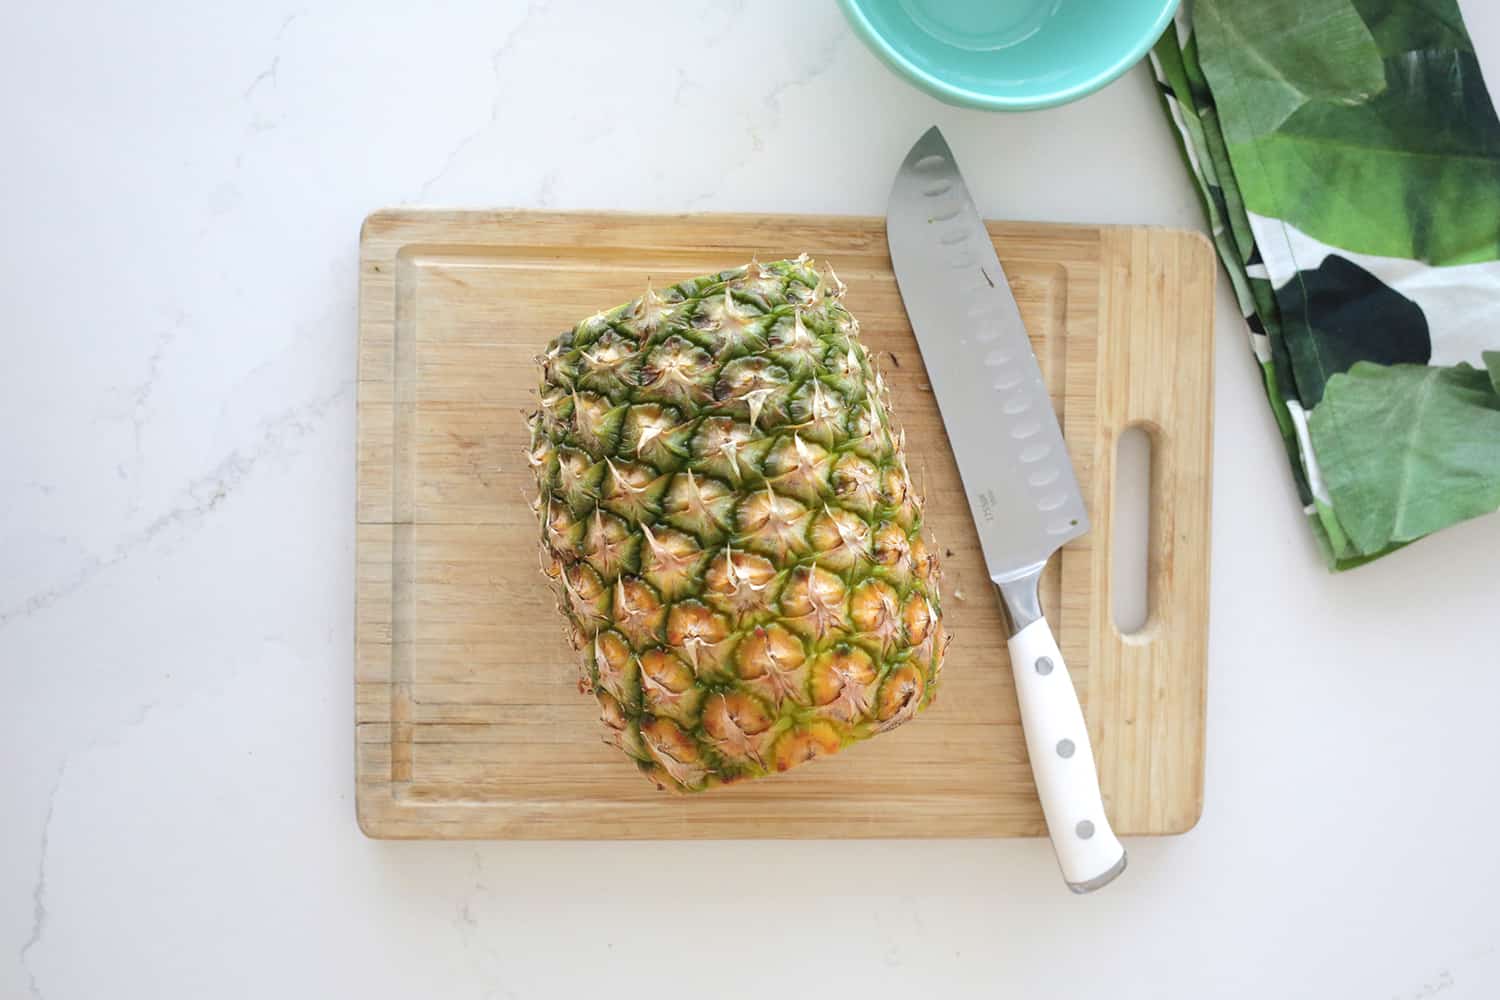 Pineapple cut bottom and top